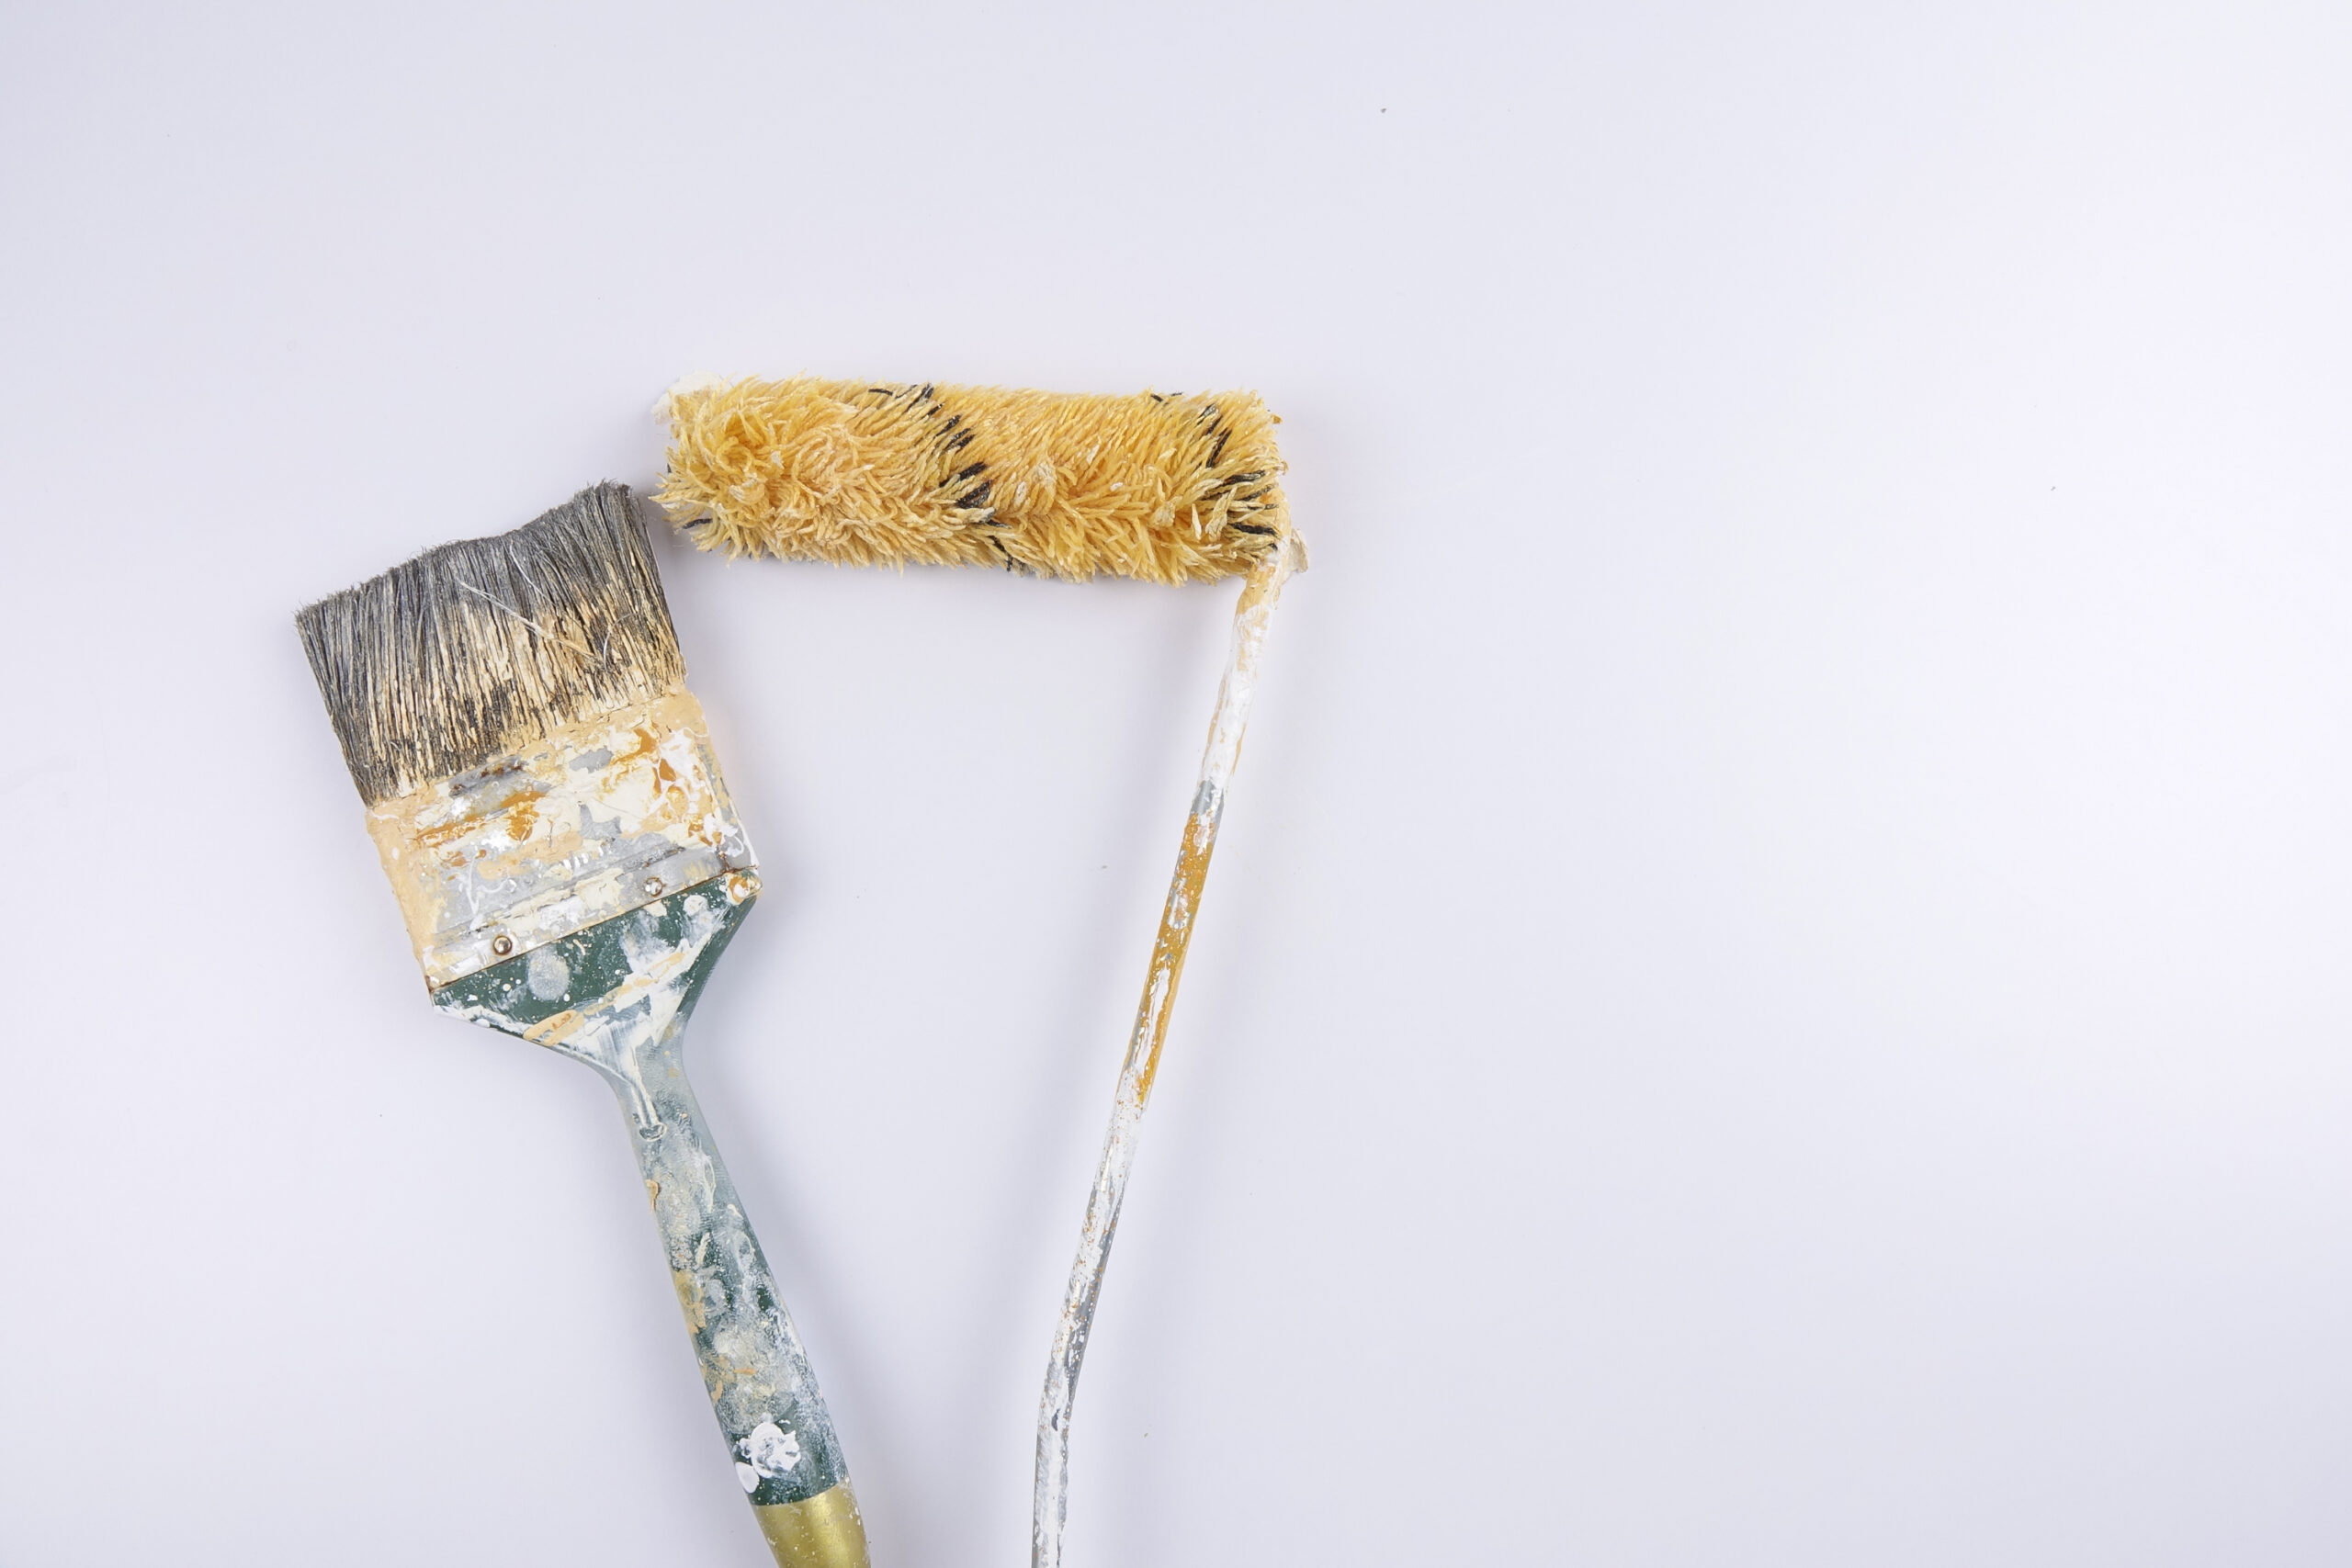 Dirty home paintbrush and paint roller in front of white backdrop.